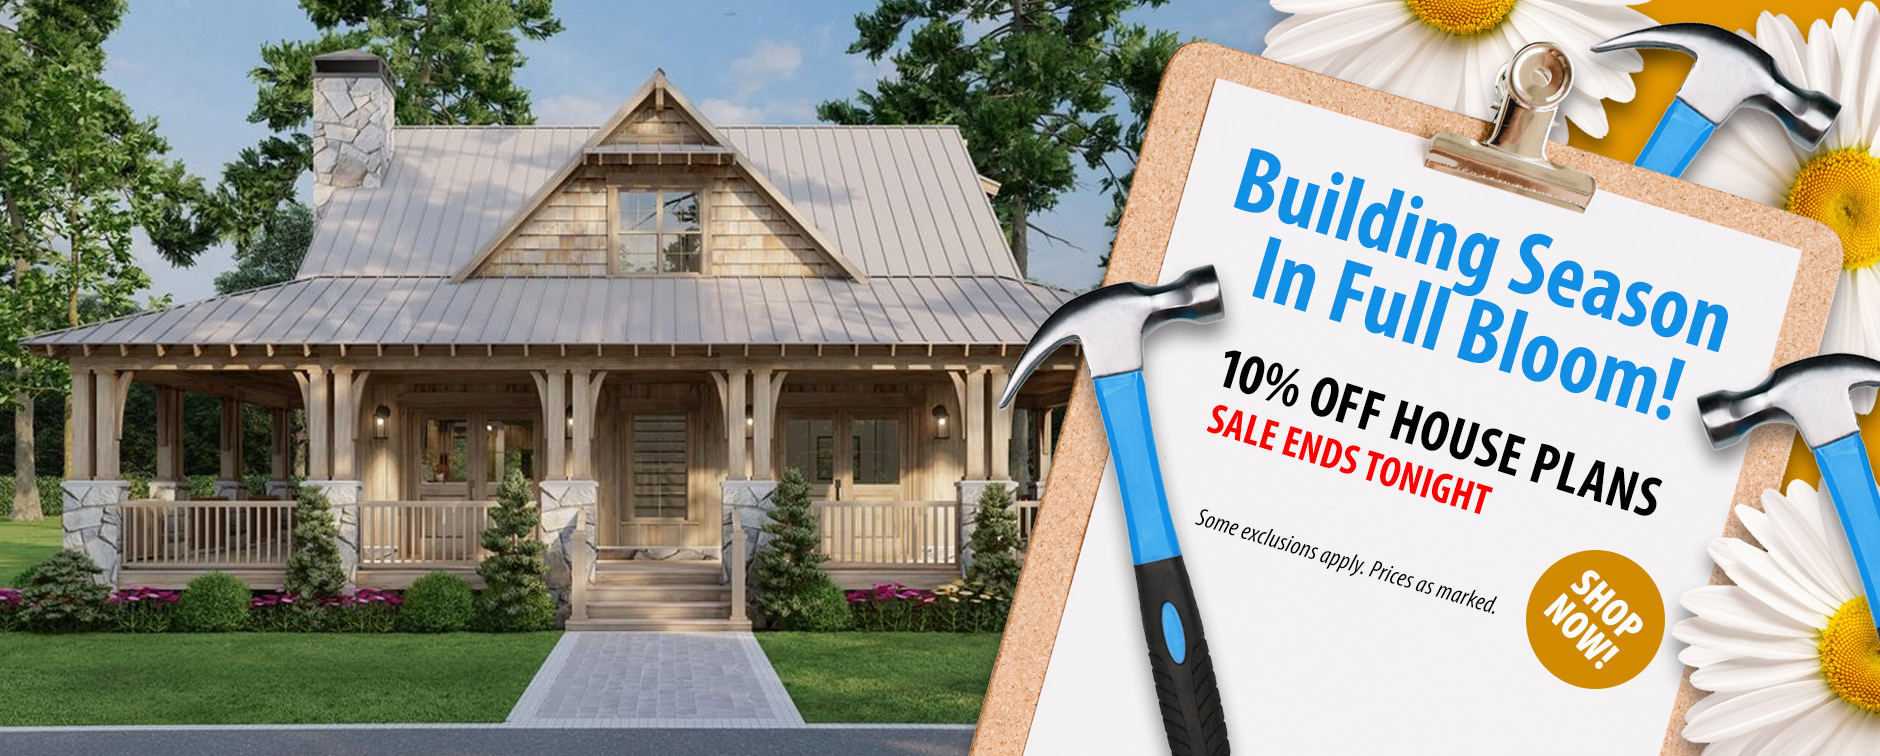 Ends Tonight: Enjoy 10% Off Thousands of House Plans